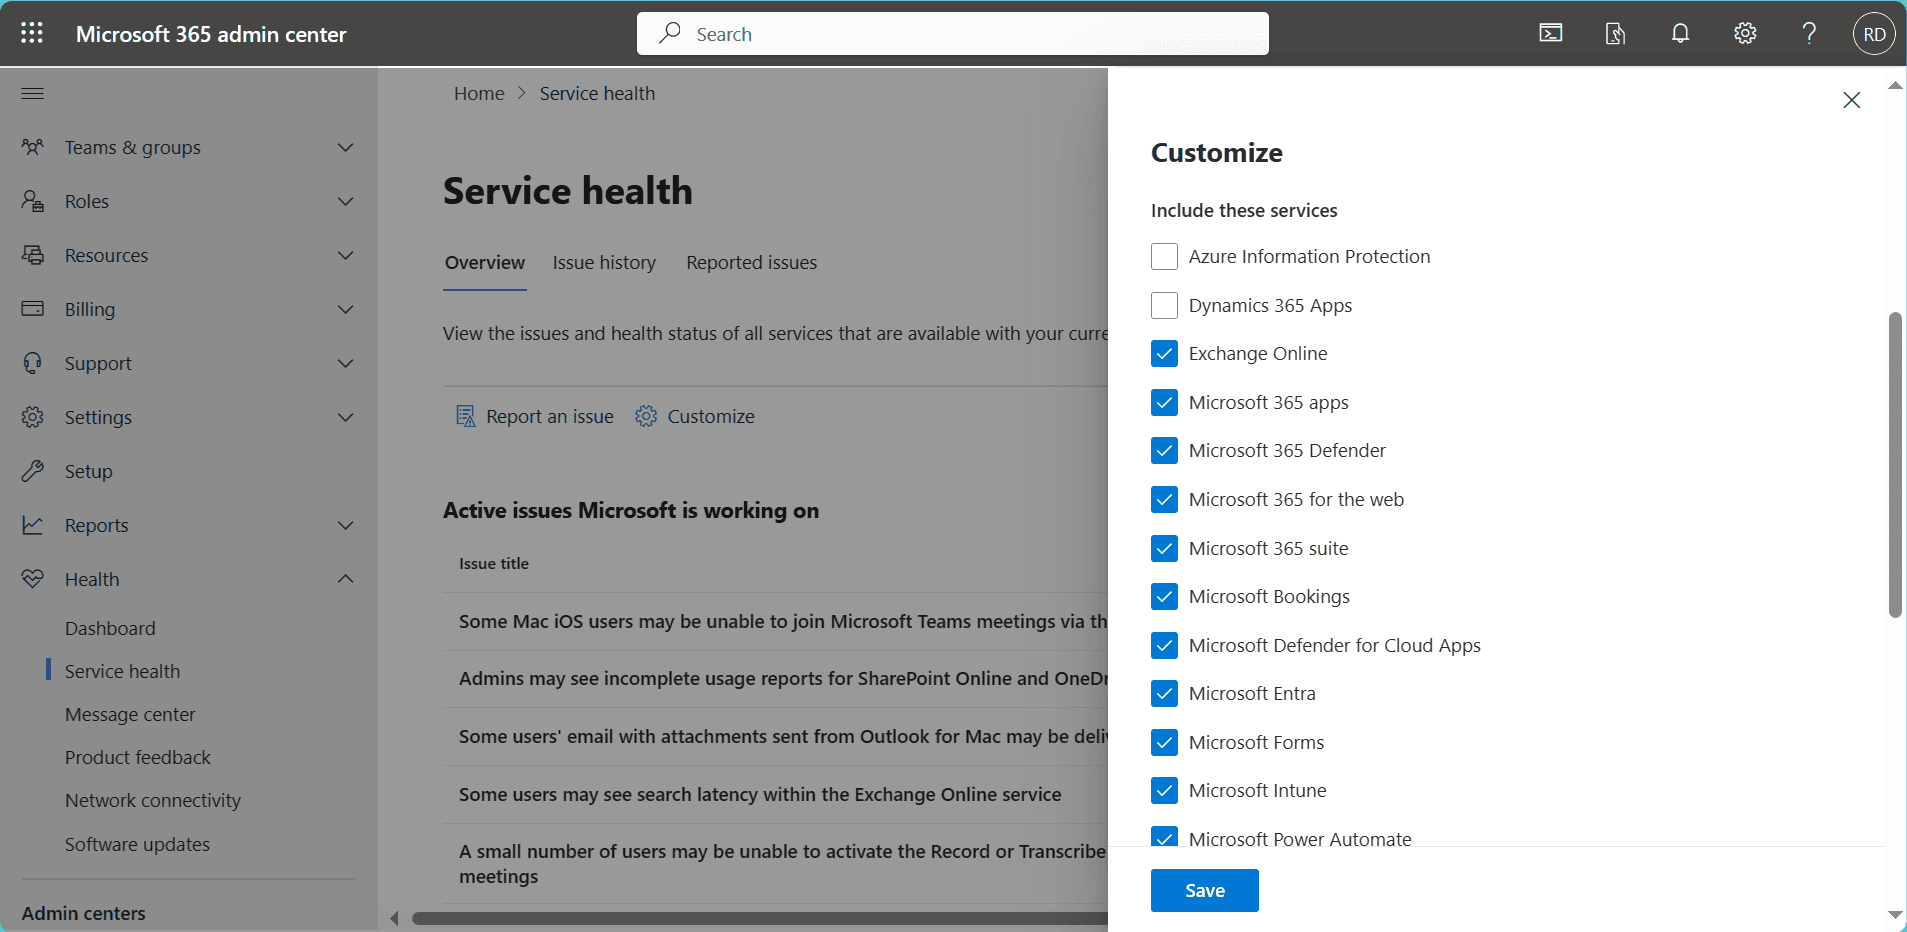 Context menu with Extract All option